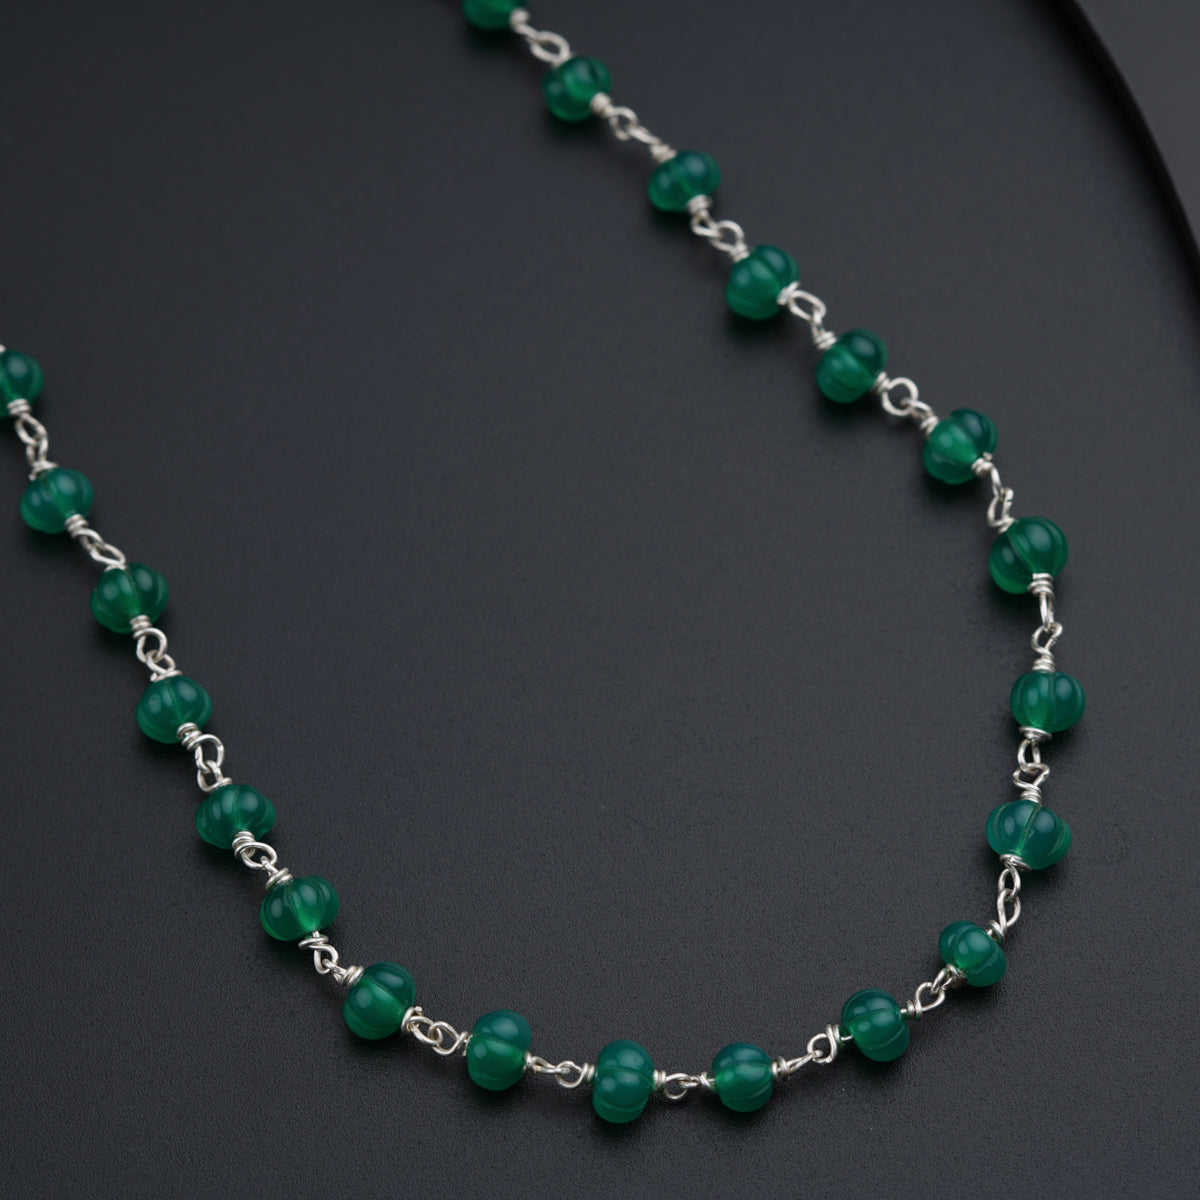 a green beaded necklace on a black surface